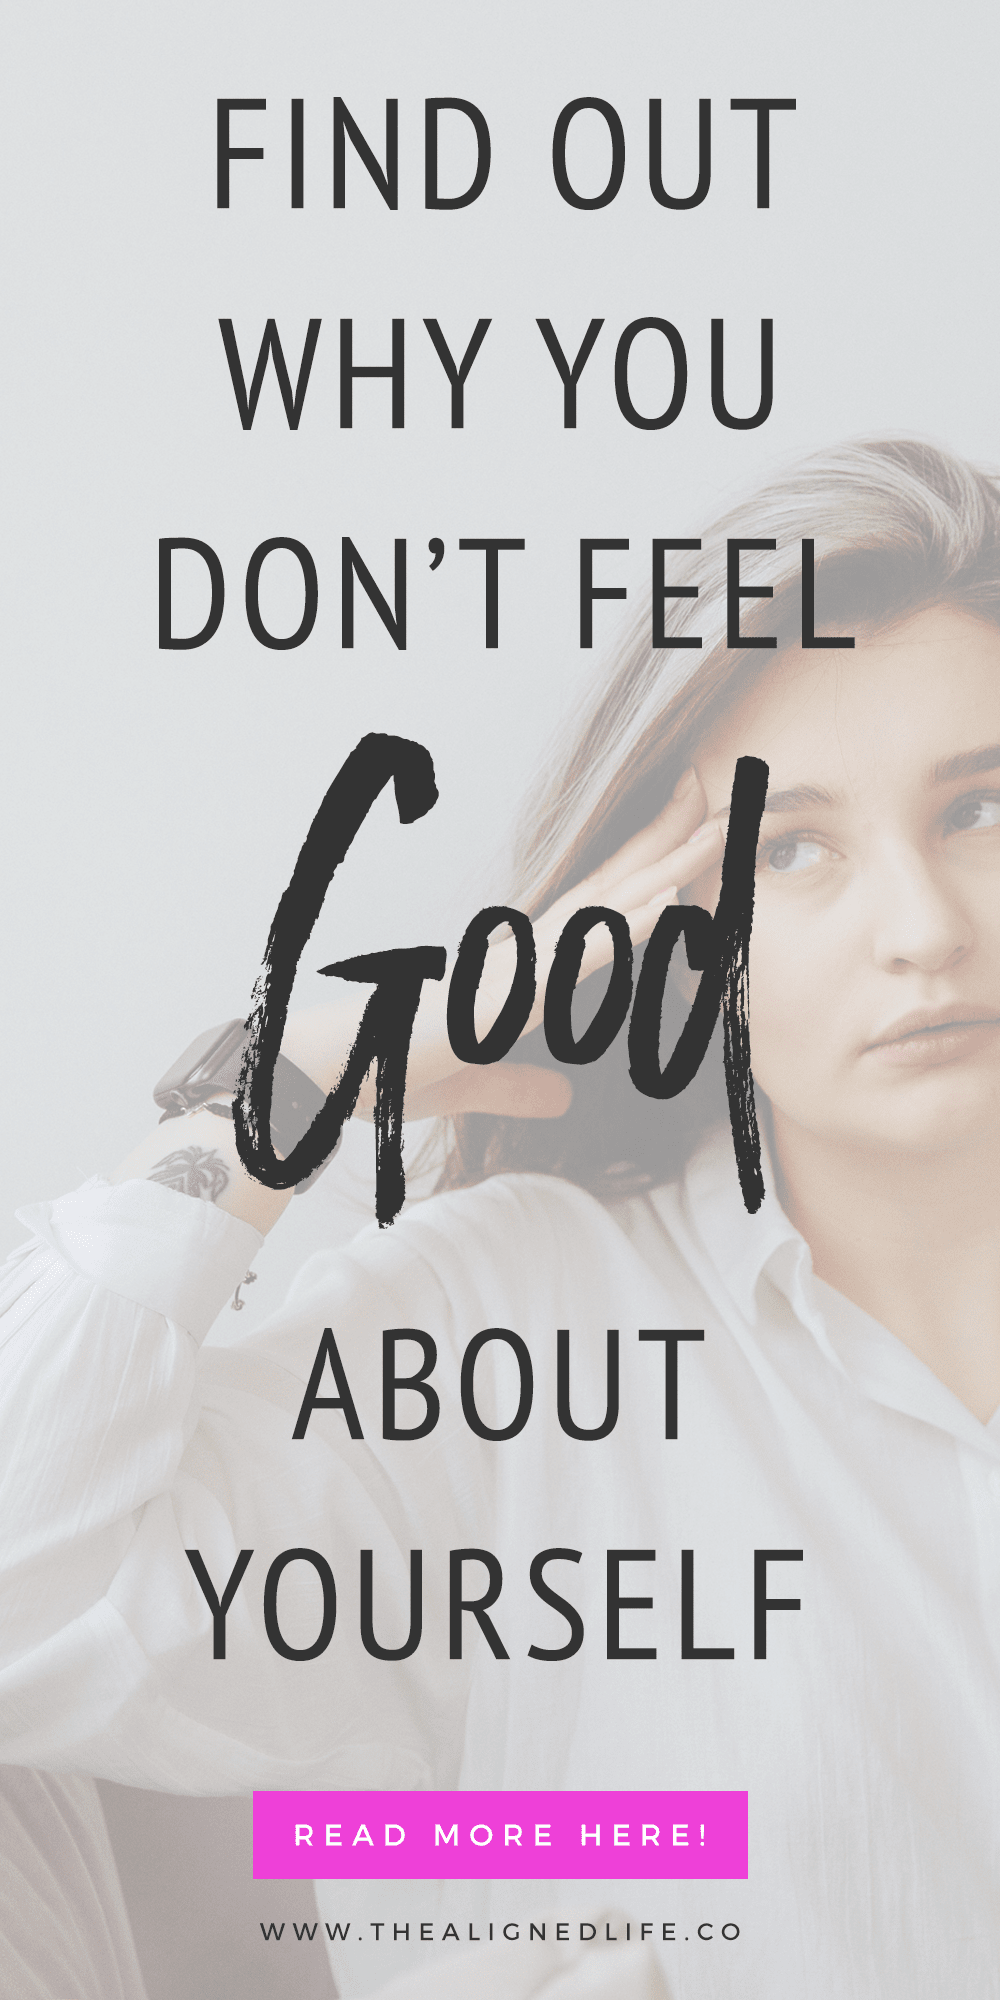 The Real Reasons Why You Don't Feel Good About Yourself